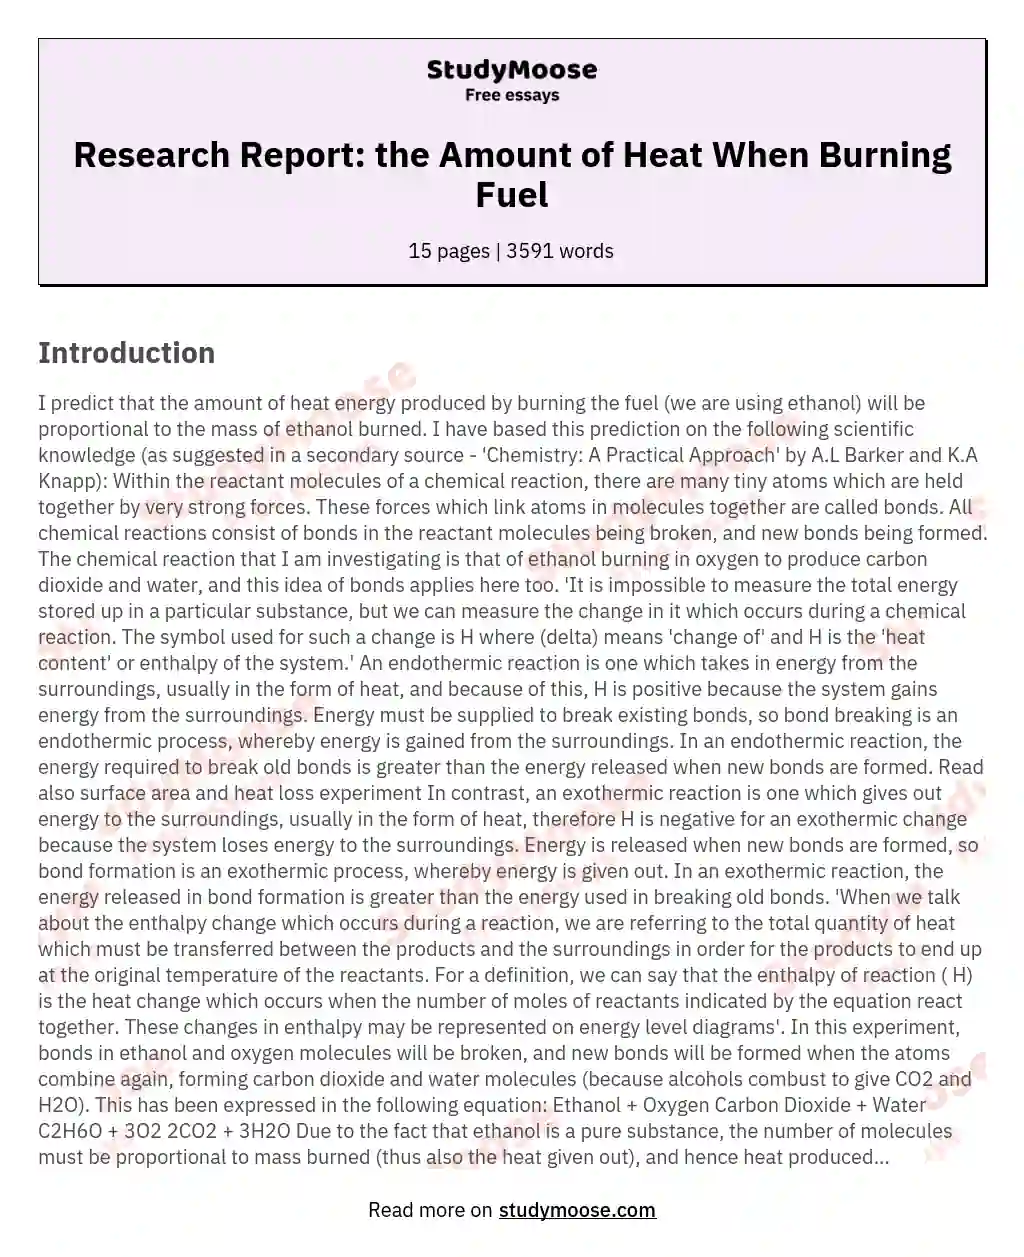 Research Report: the Amount of Heat When Burning Fuel essay